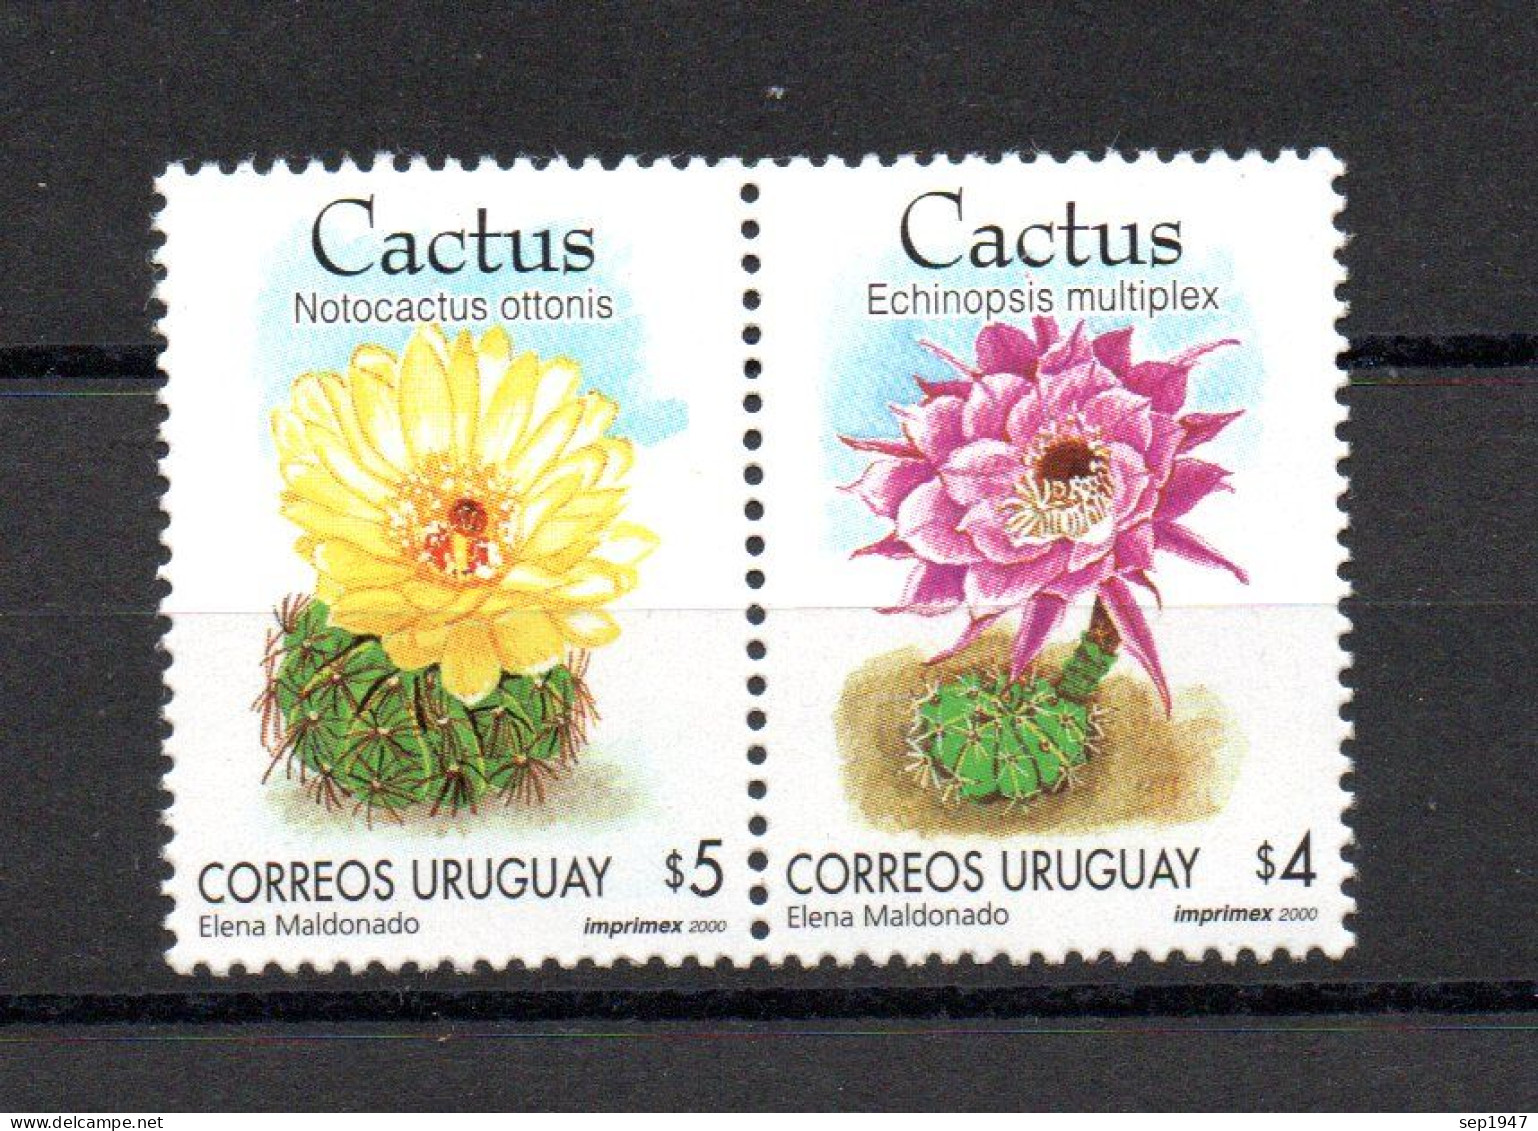 Year 2000 Uruguay Cactus, MNH, Shipping From Costa Rica By International Tracking Mail - Uruguay